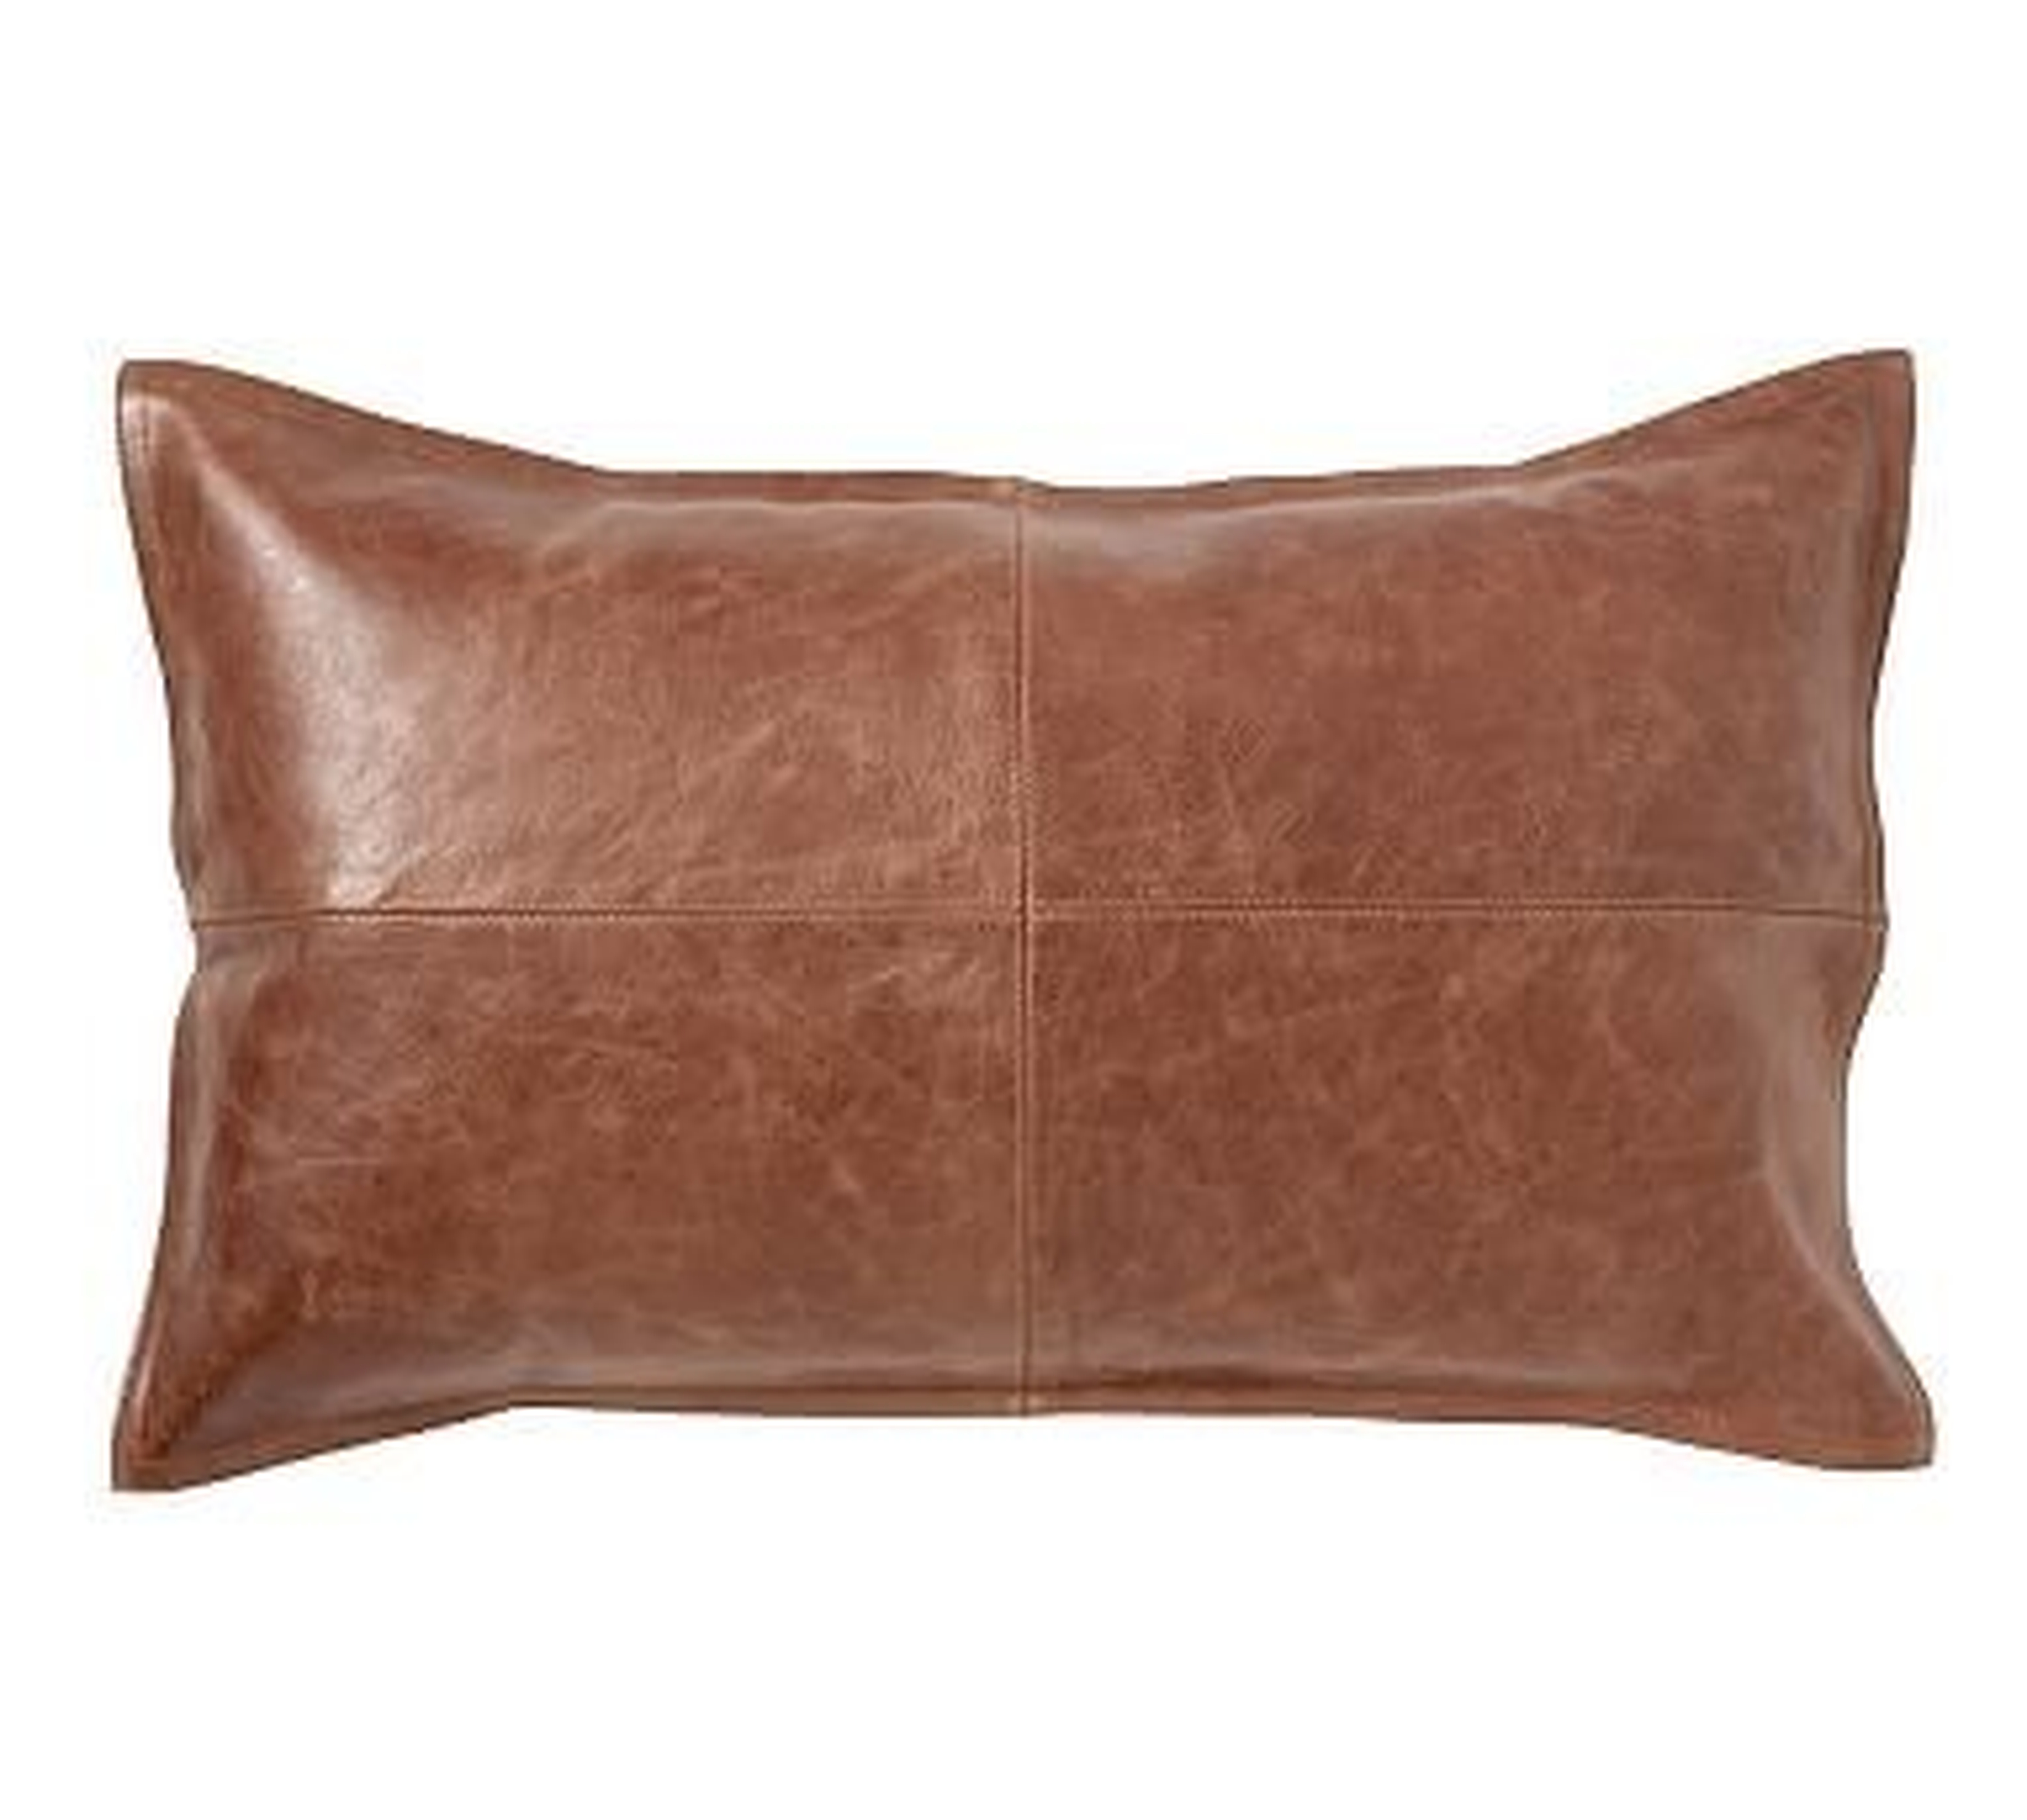 Pieced Leather Lumbar Pillow Cover, 16x26", Whiskey - Pottery Barn